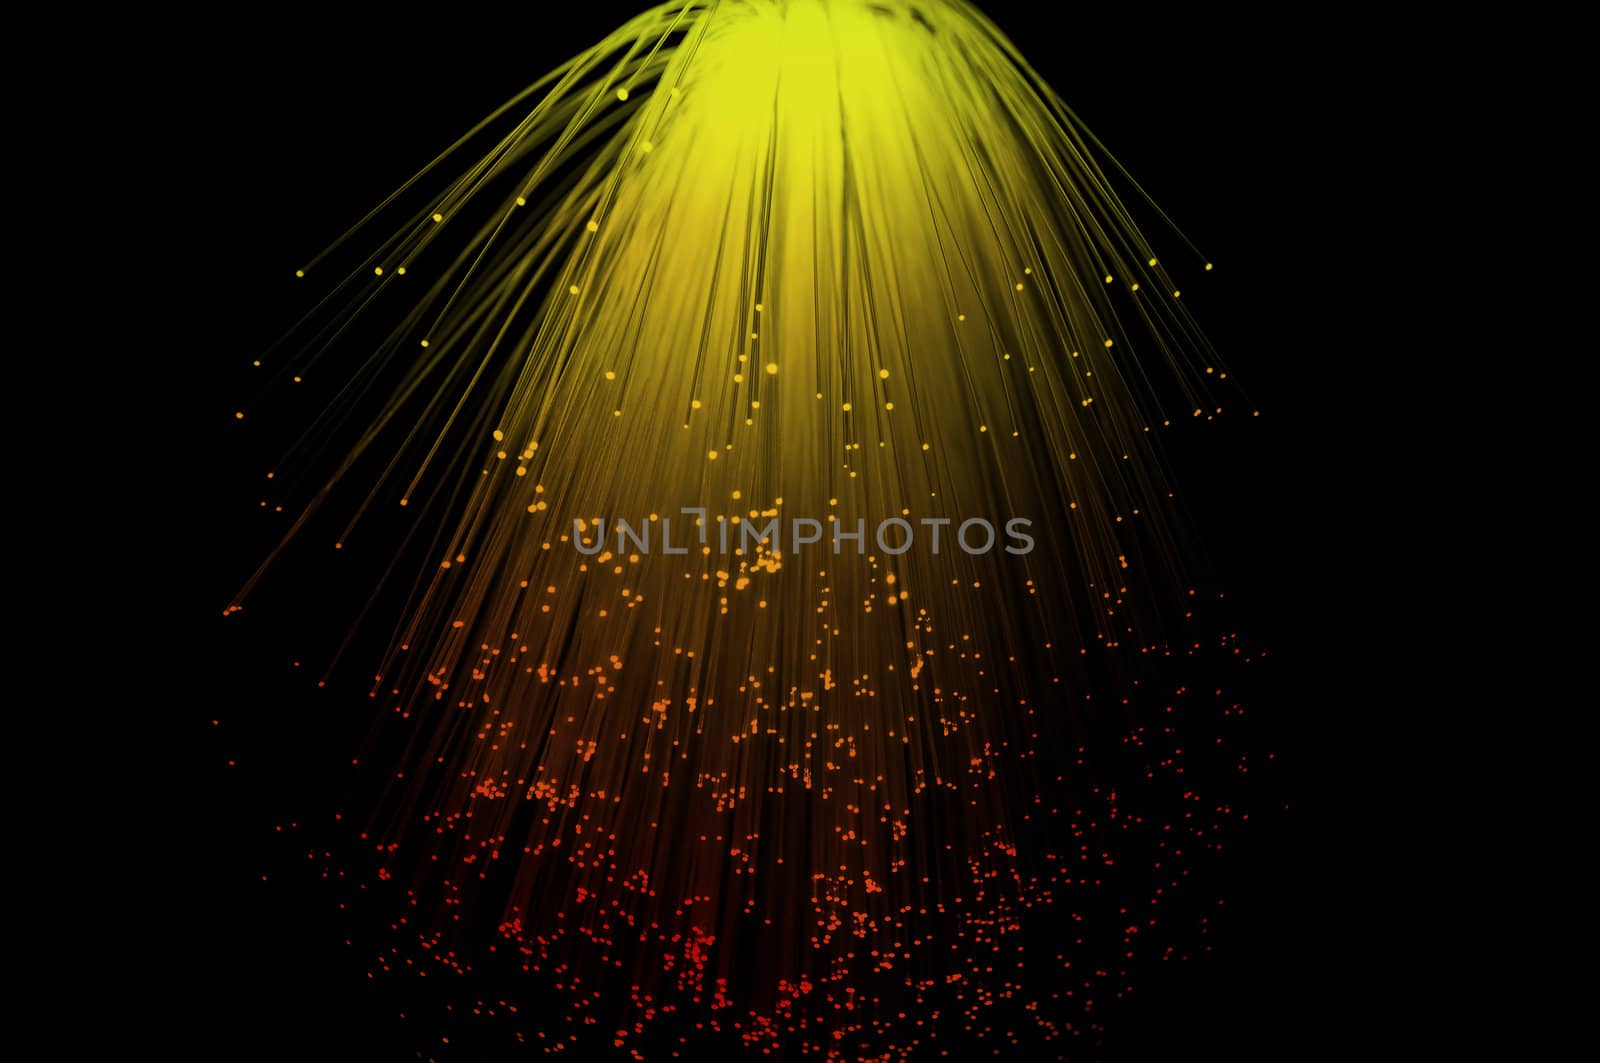 Yello and red coloured fibre optic light strands cascading down with a black background.